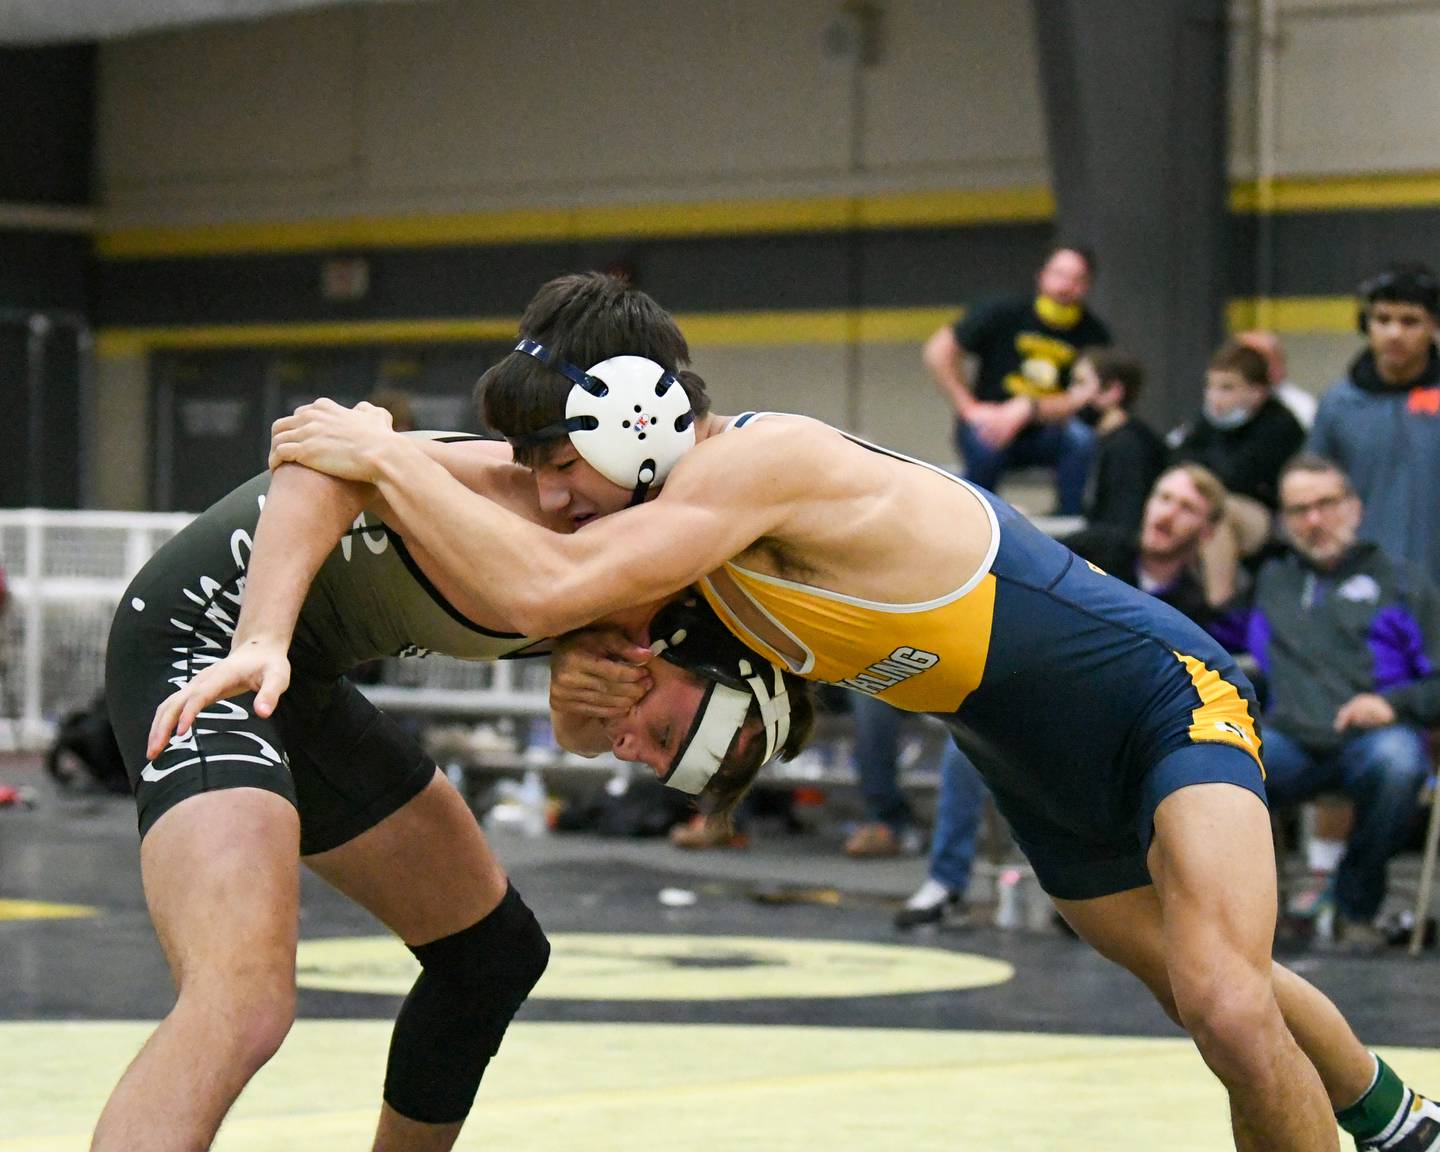 Sterling Drew Kested wrestles in the 145 weight class during the 3rd place match up where he took fourth on Sat. Jan 8th during the wrestling invite at Sycamore High School.